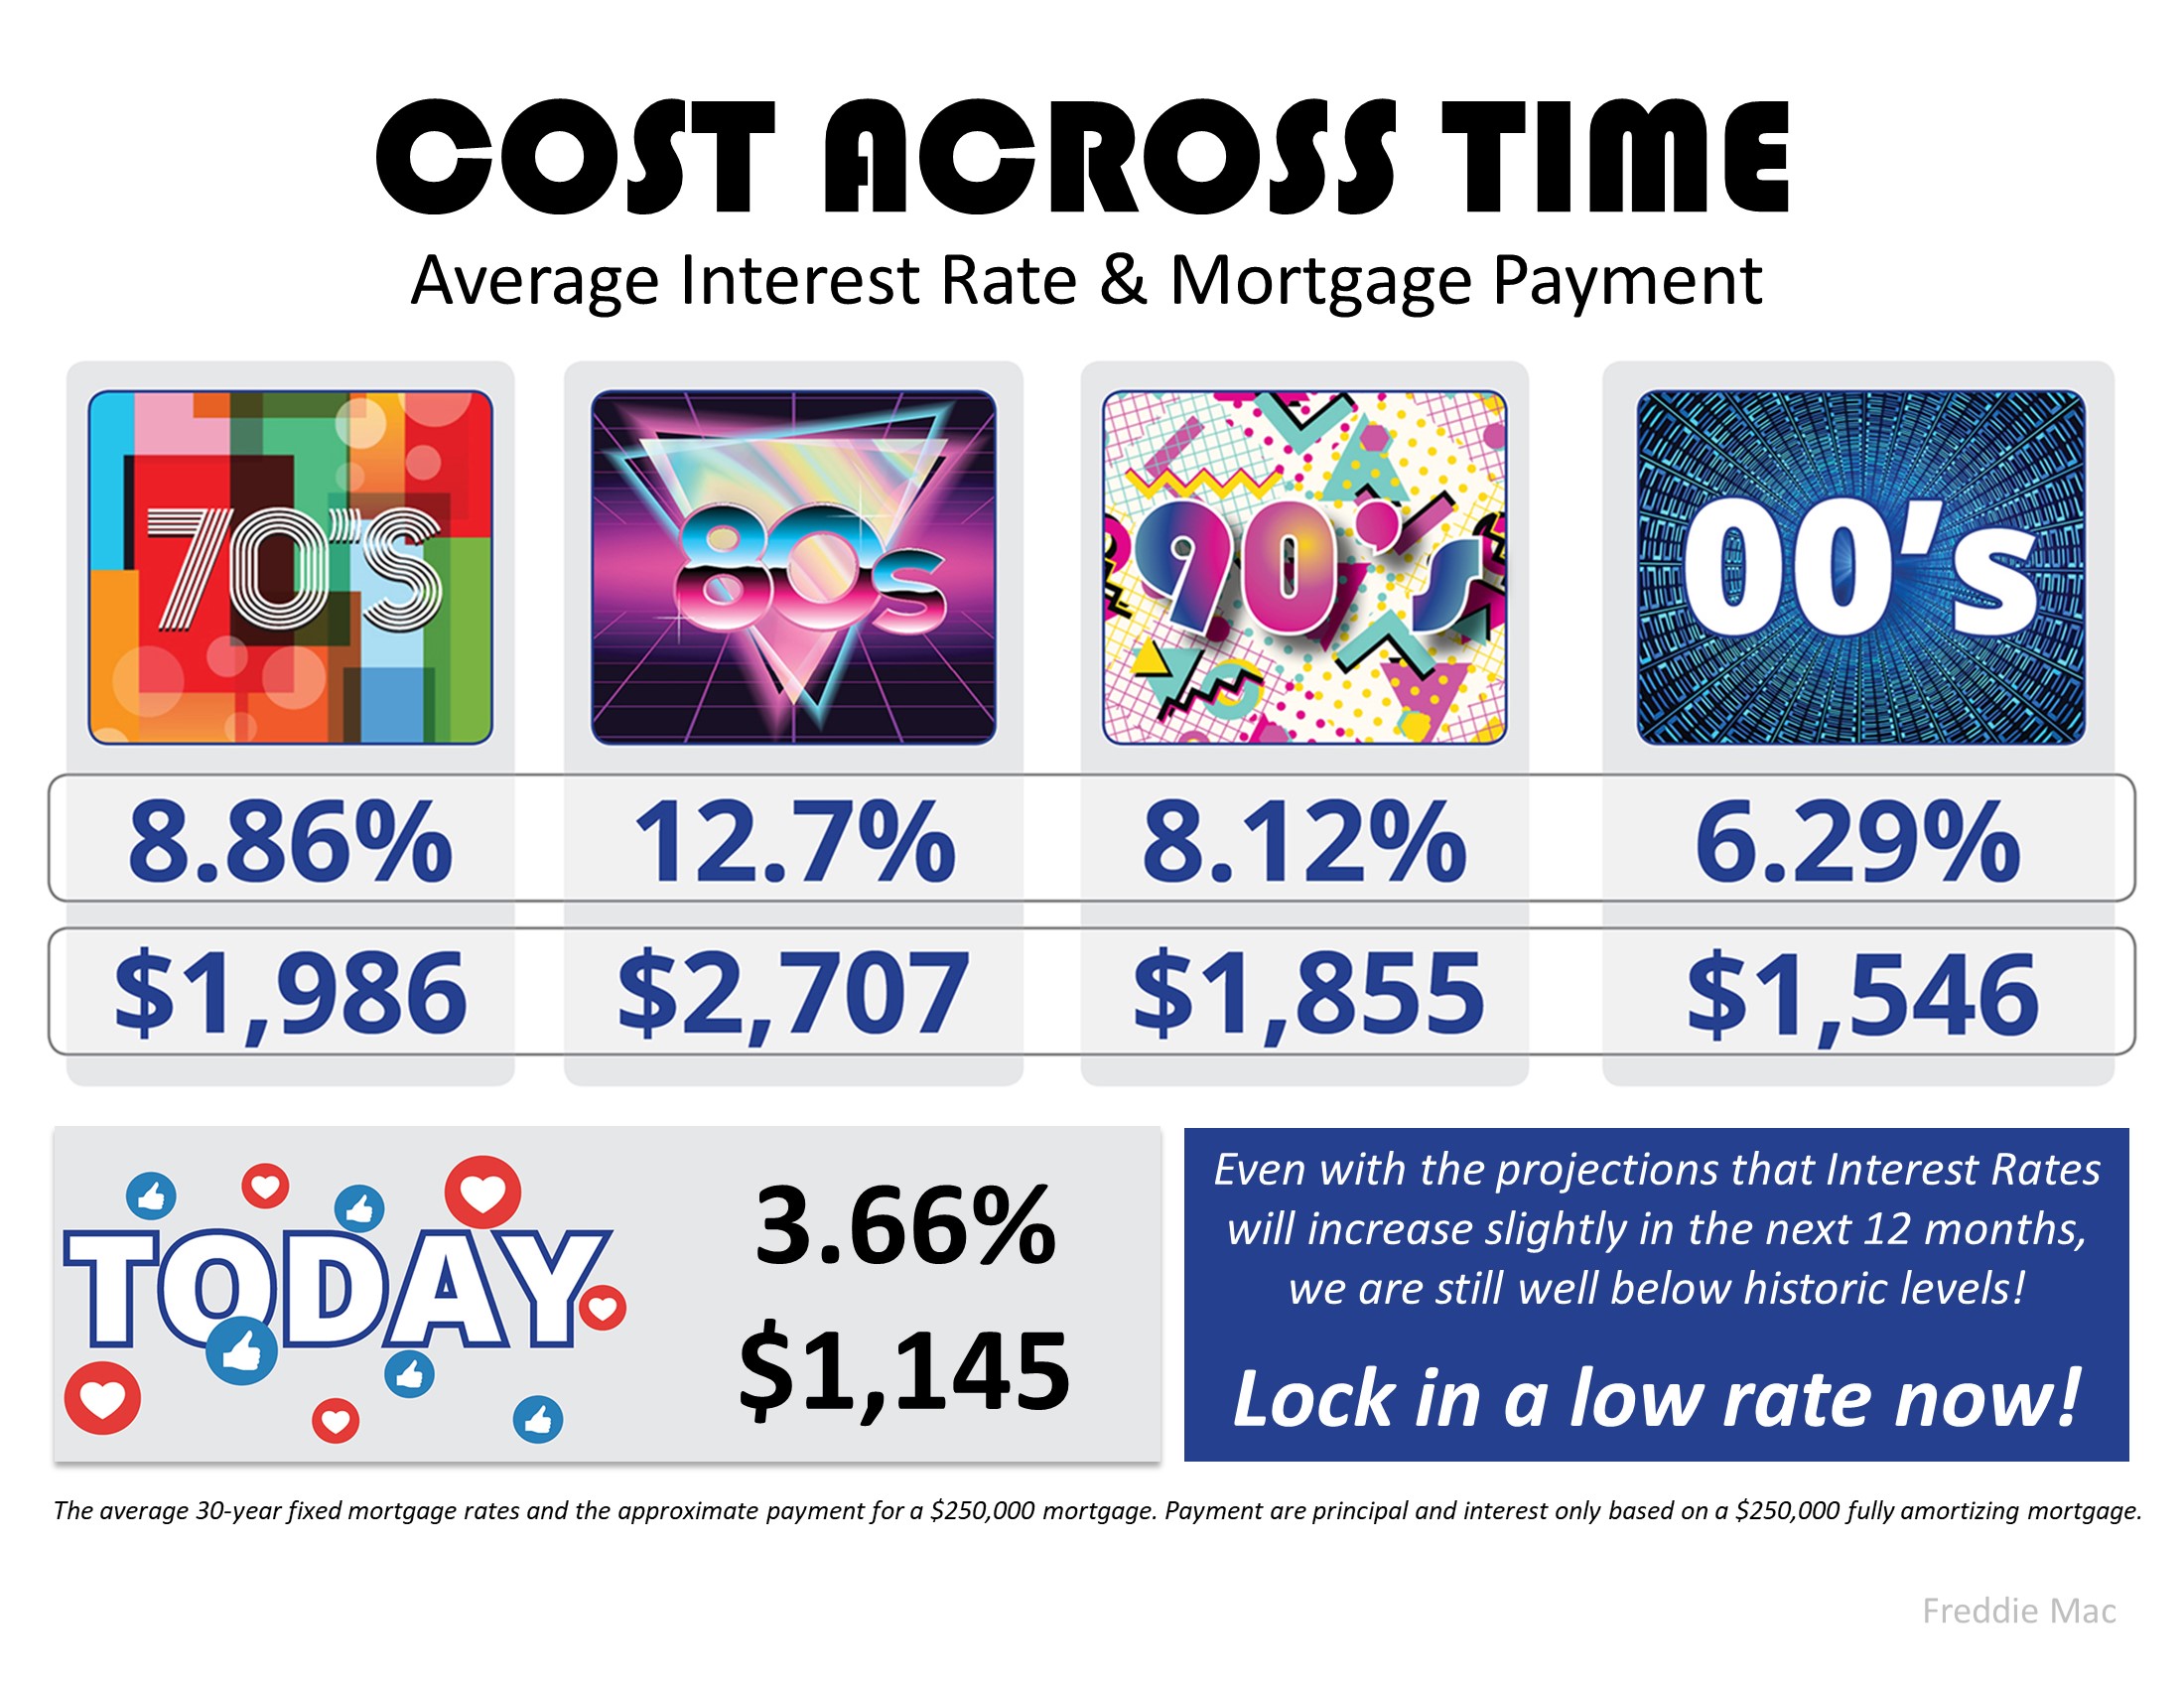 The Cost Across Time [INFOGRAPHIC] | Simplifying The Market